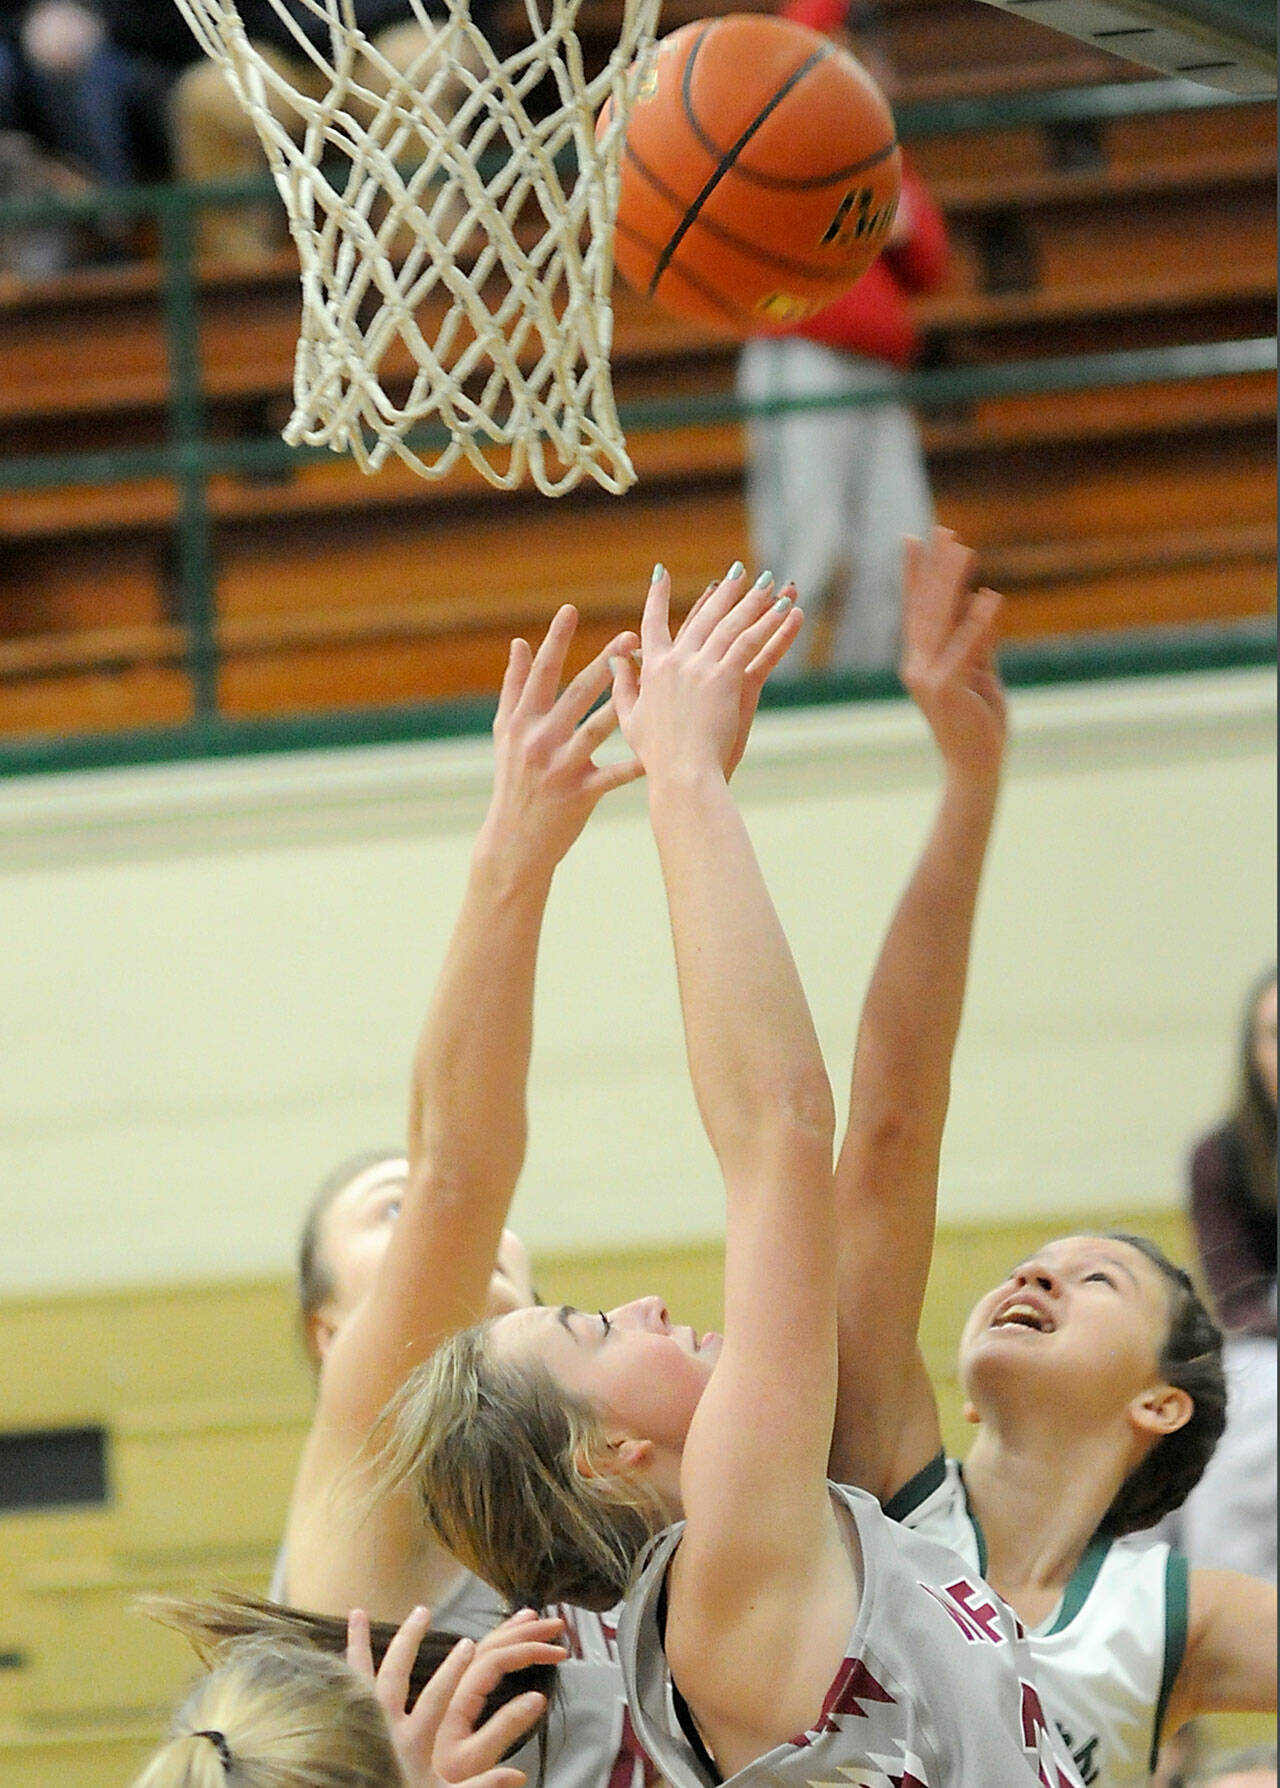 Port Angeles’ Lindsay Smith, right, puts up the ball as W.F West’s Julia Dalan, left, and Morgan Rogerson, front, scramble for the rebound on Saturday at Port Angeles High School. (Keith Thorpe/Peninsula Daily News)